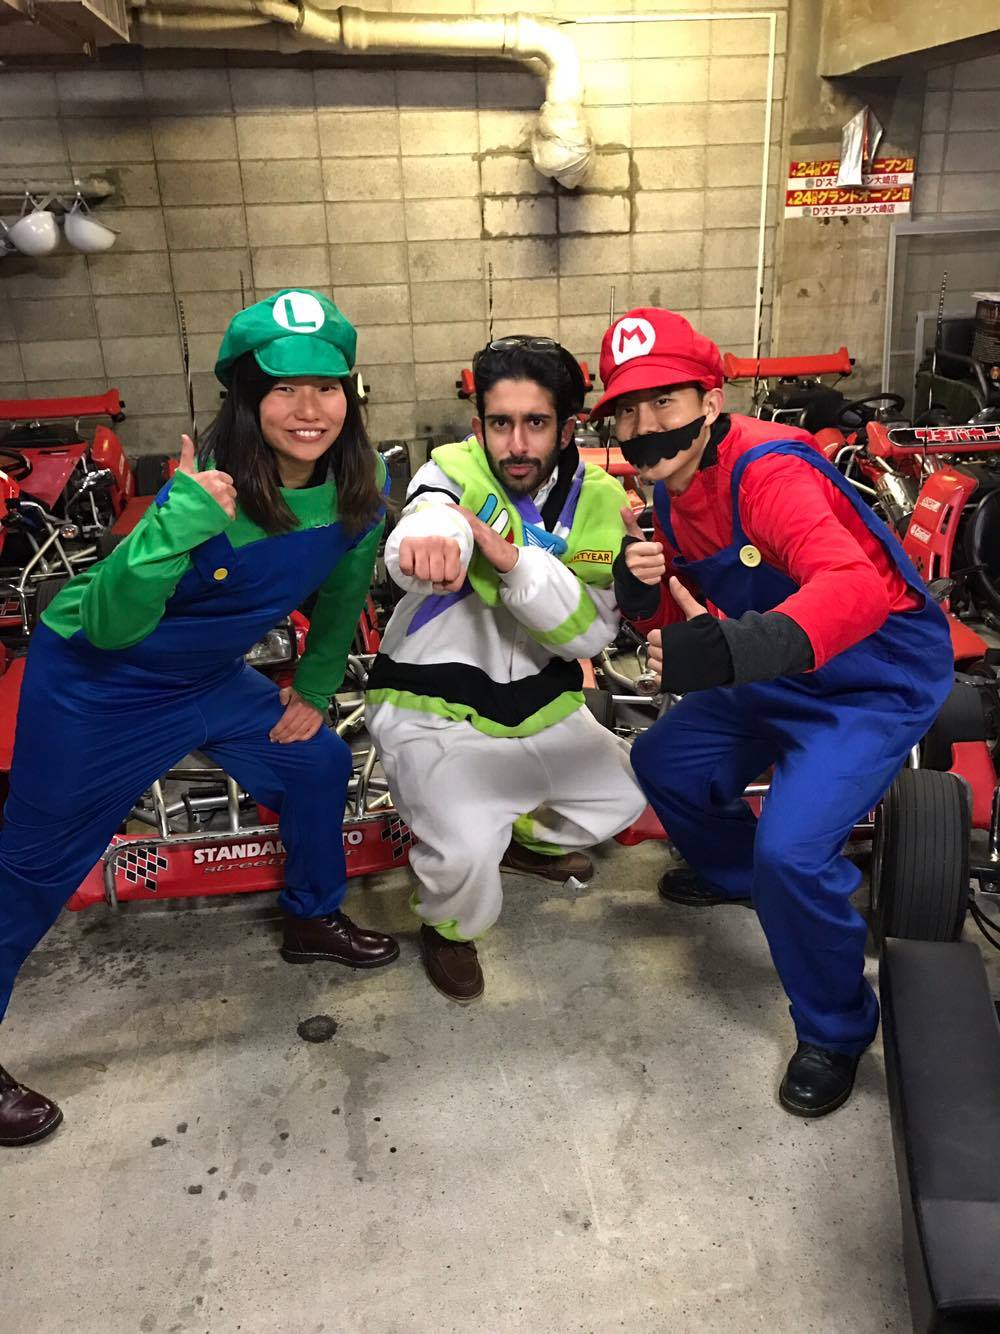 Travel Intern Team in Mario Suit - Quirky Tokyo Guide